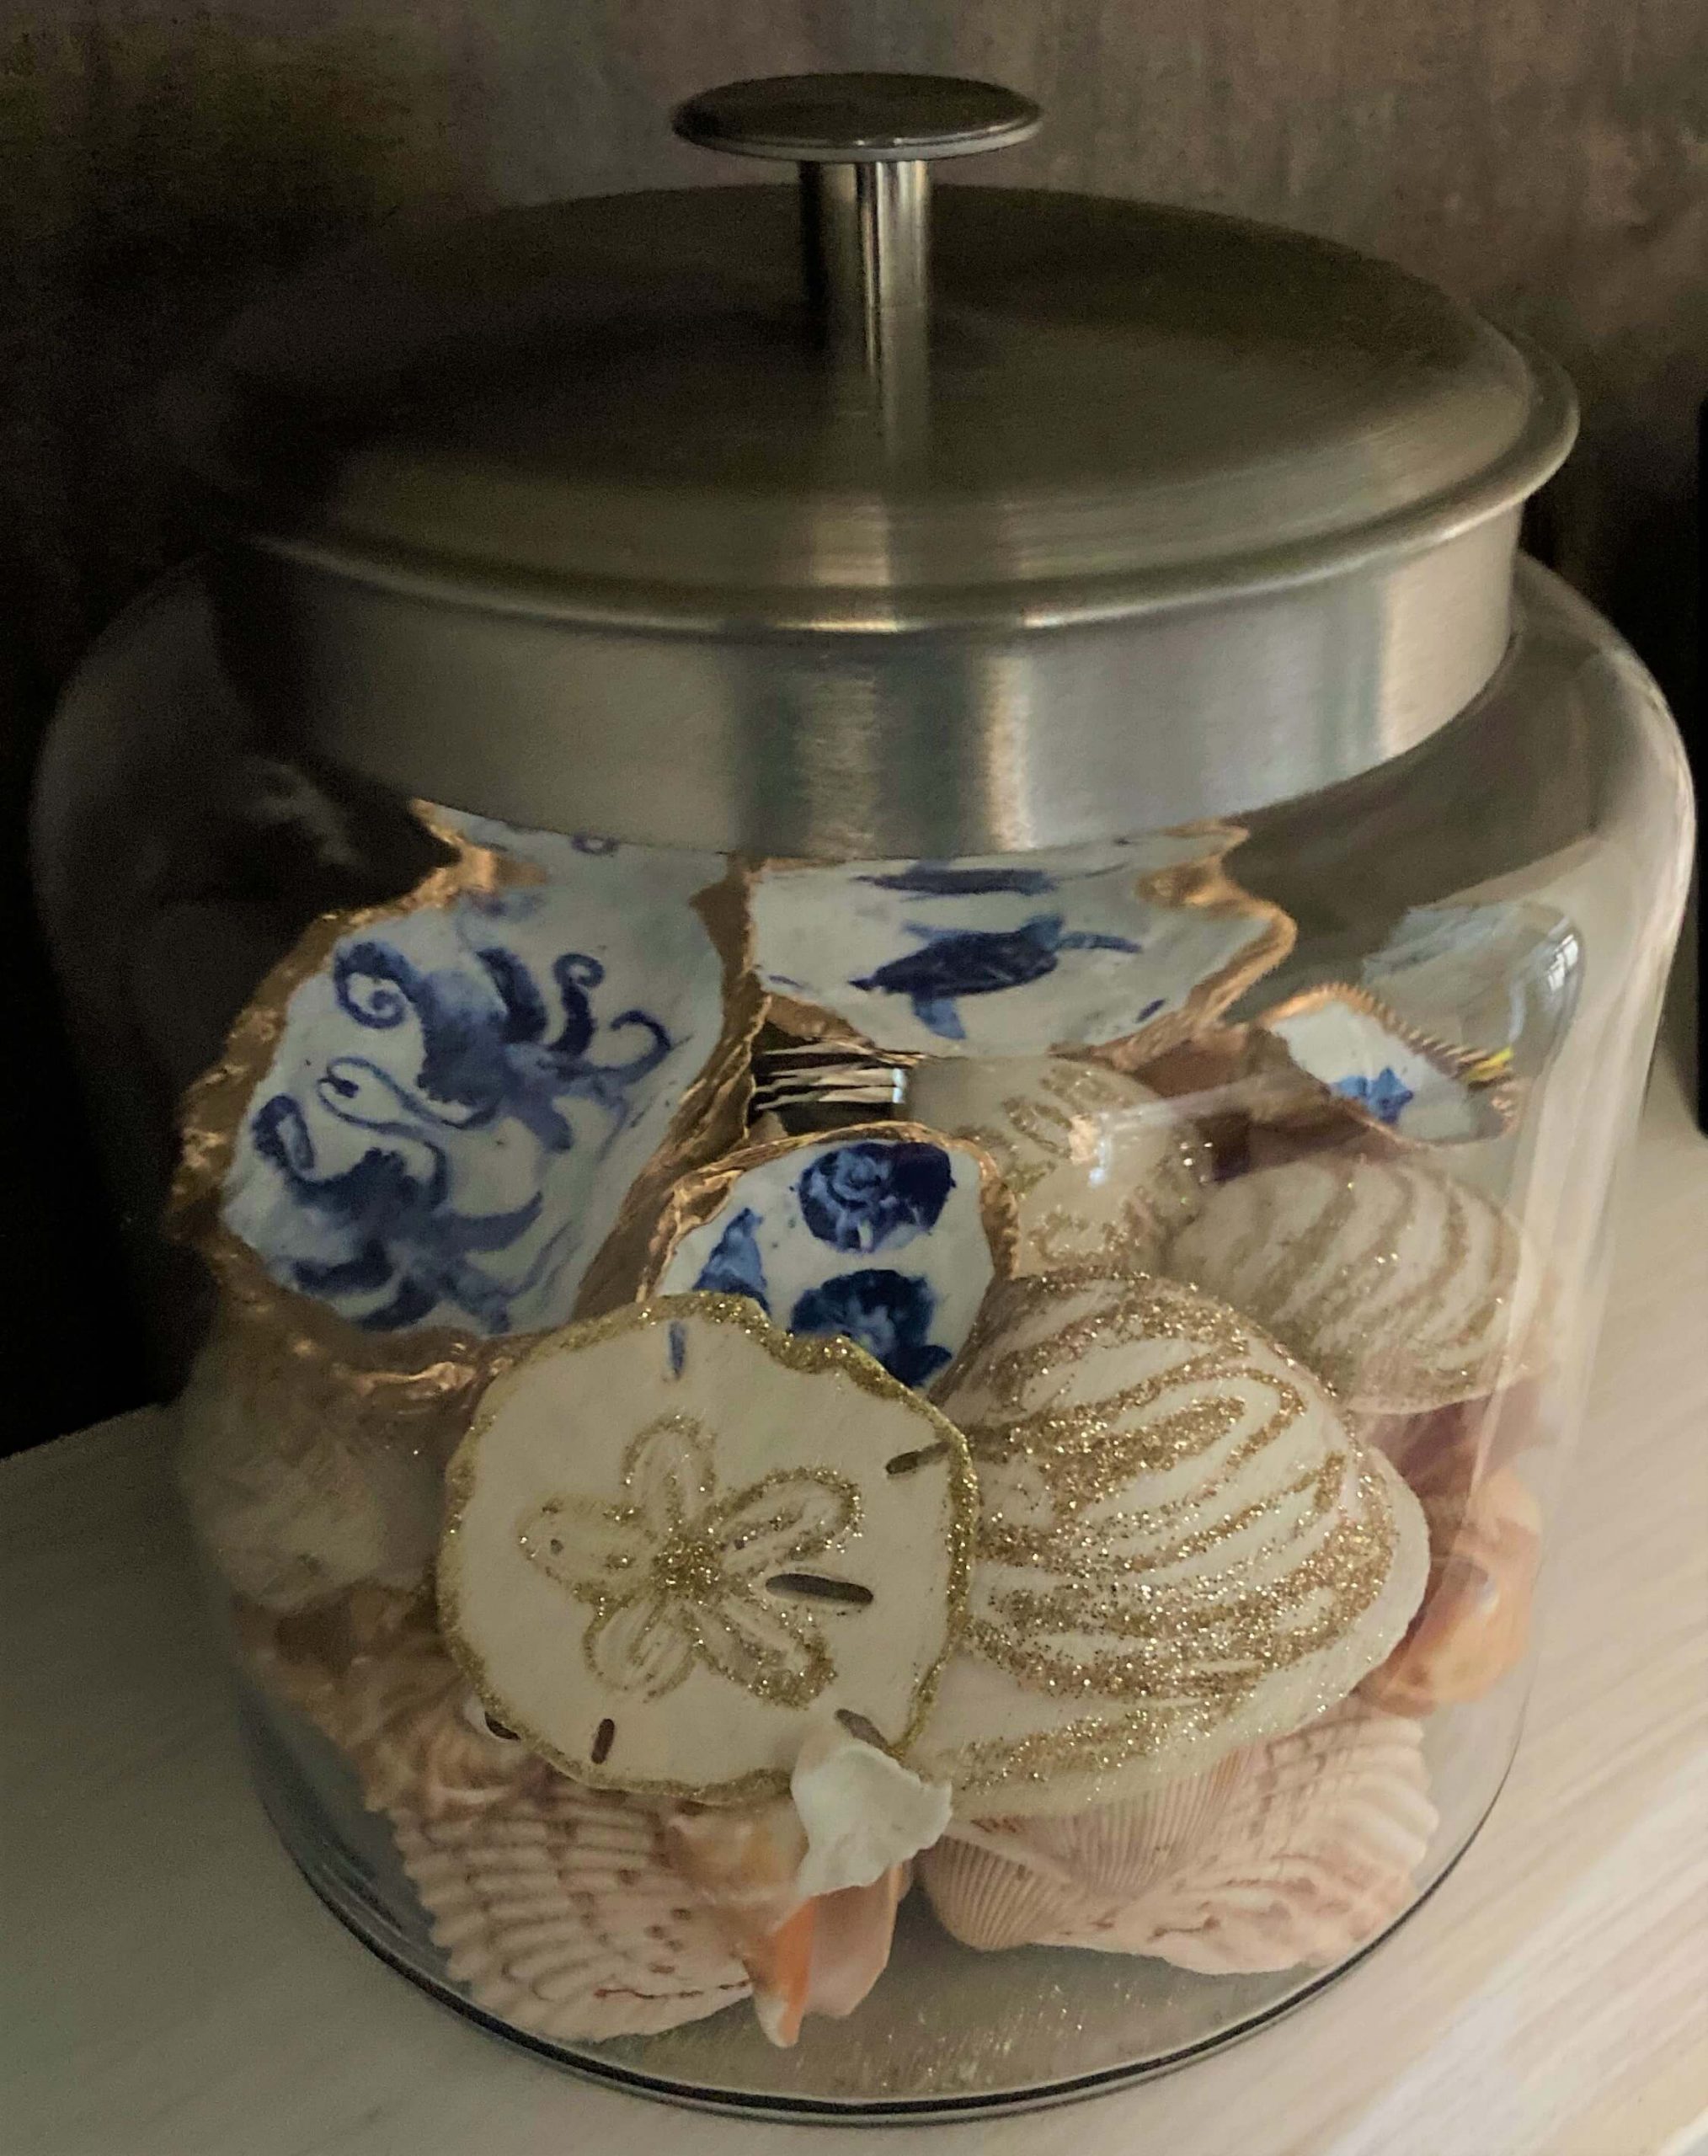 Decoupage and glittered sea shells displayed in a jar